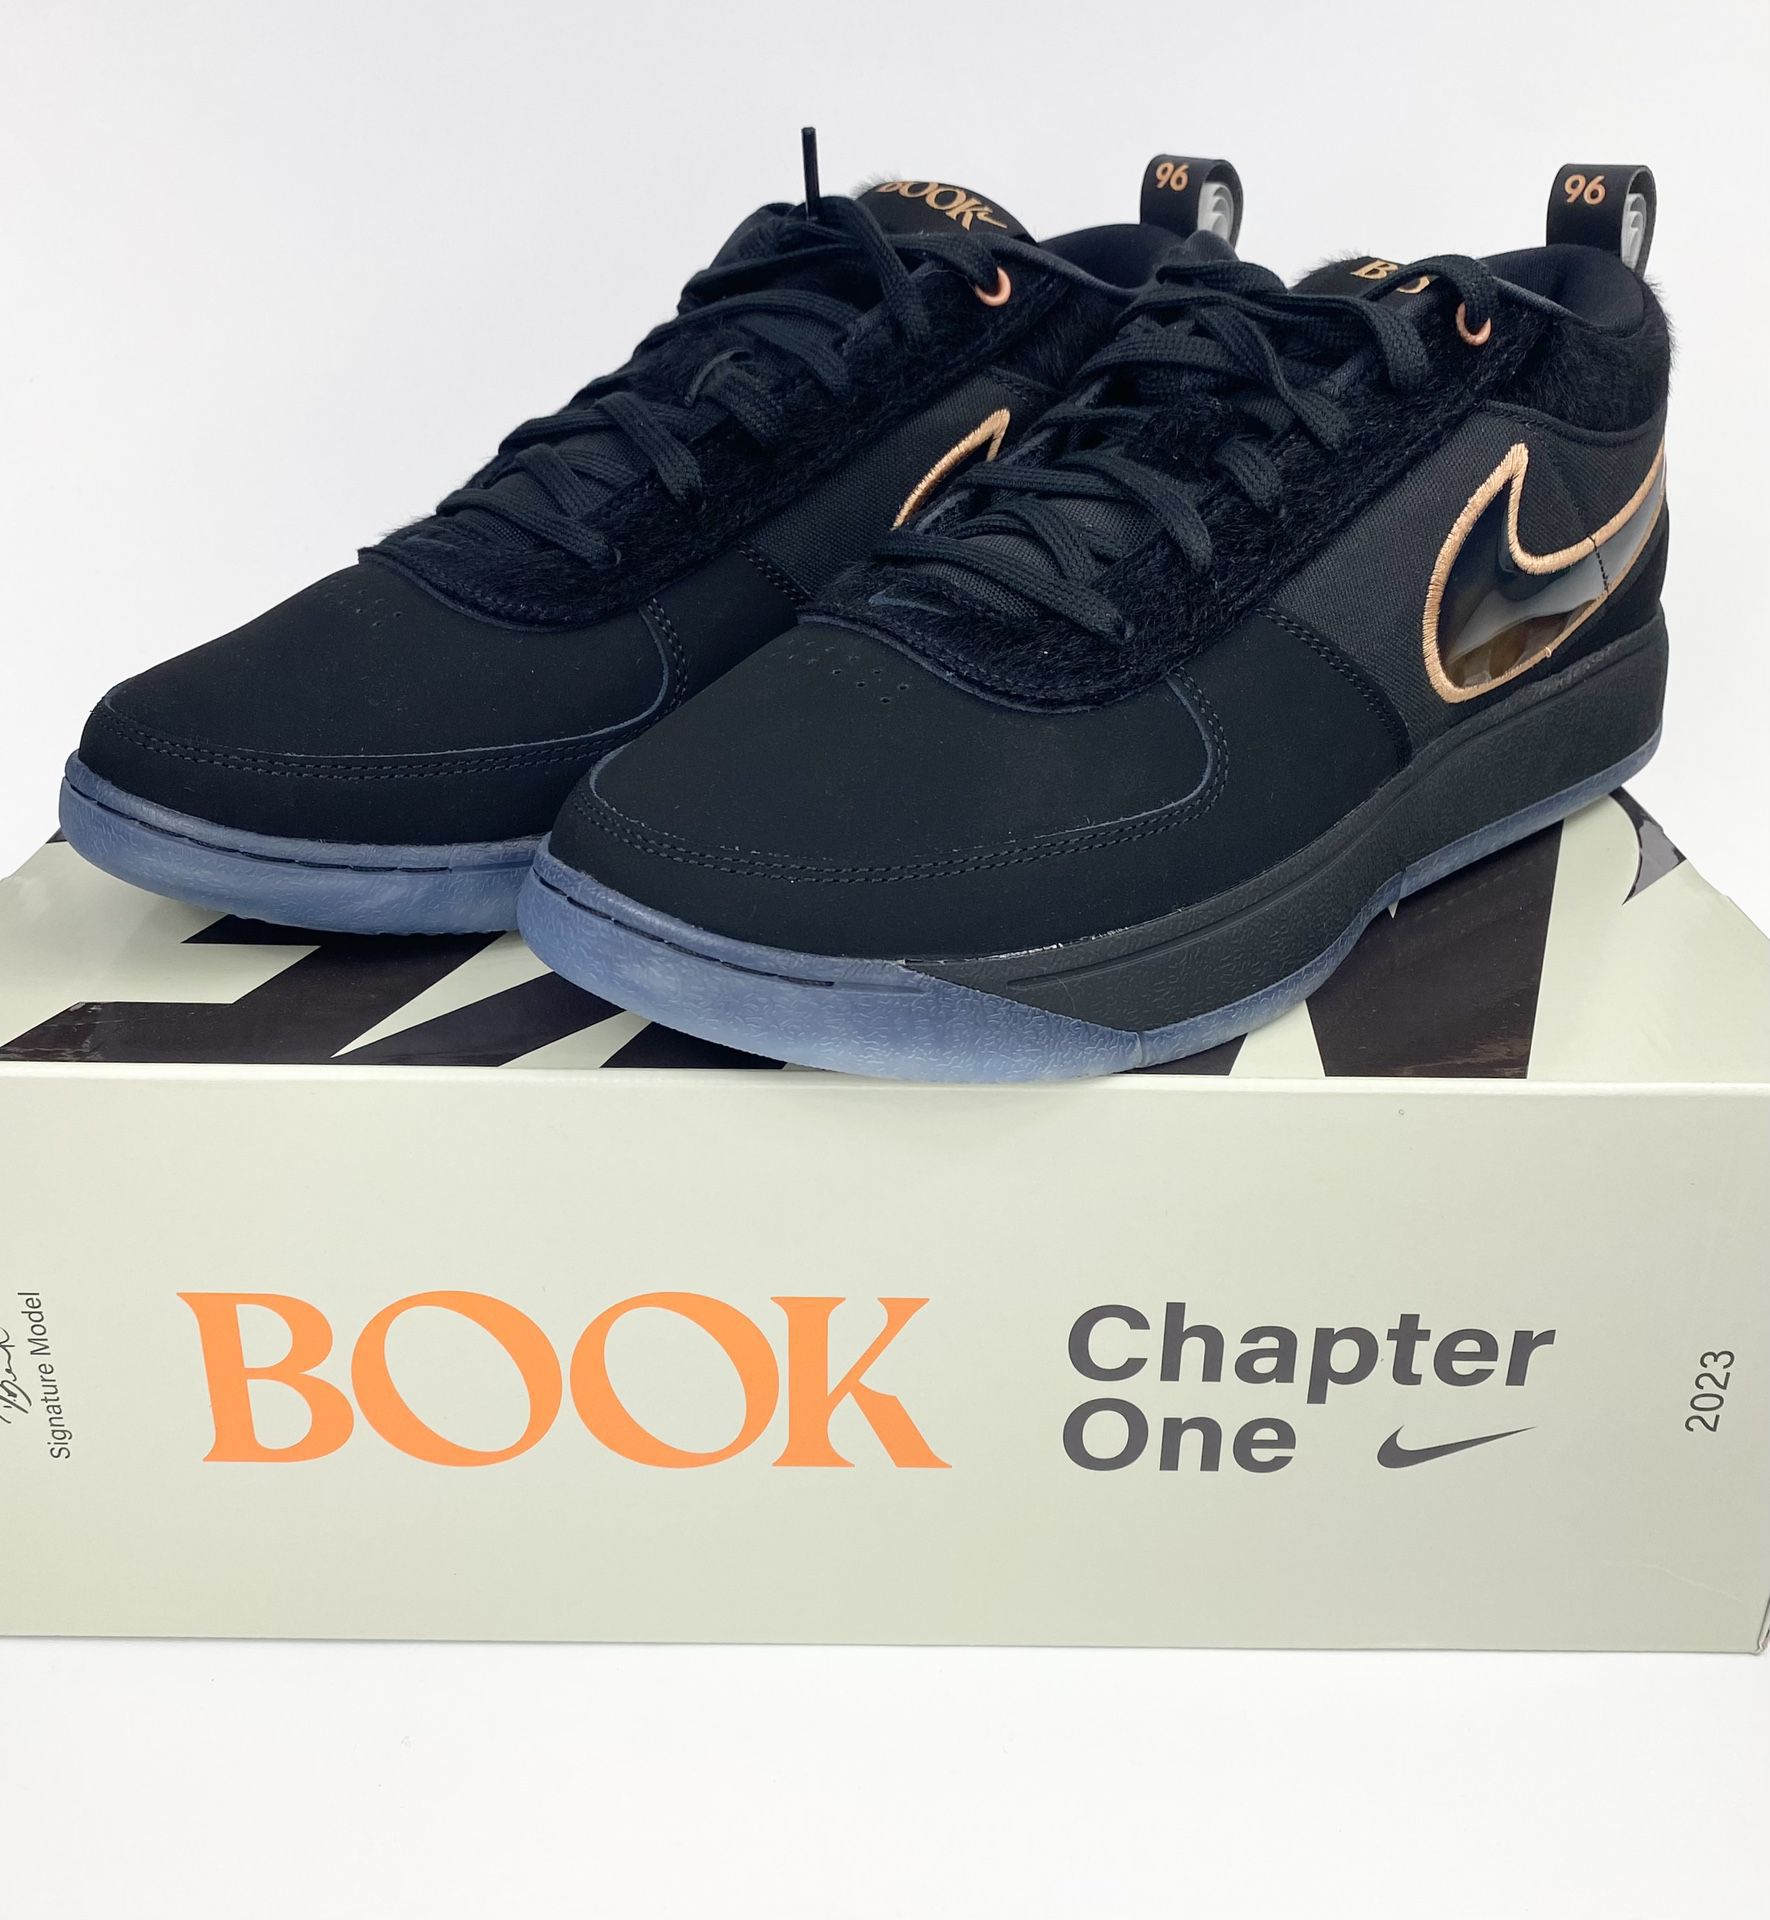 Nike Book 1 Haven (Translucent Outsole)